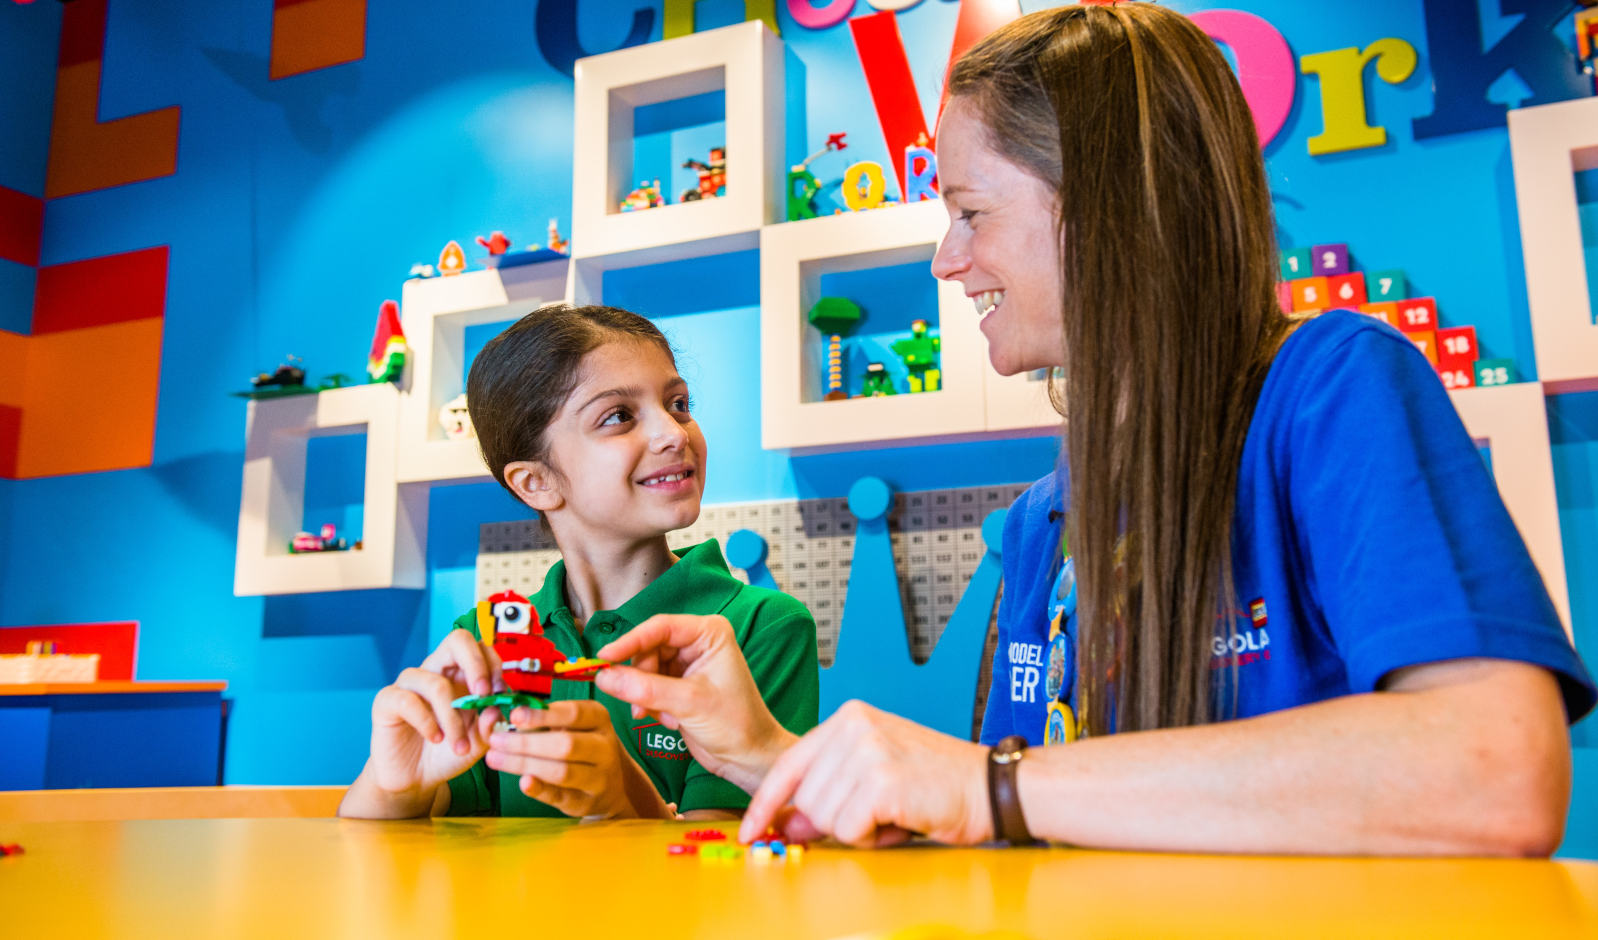 Explore the ultimate indoor LEGO playground at the Manchester LEGOLAND Discovery Centre